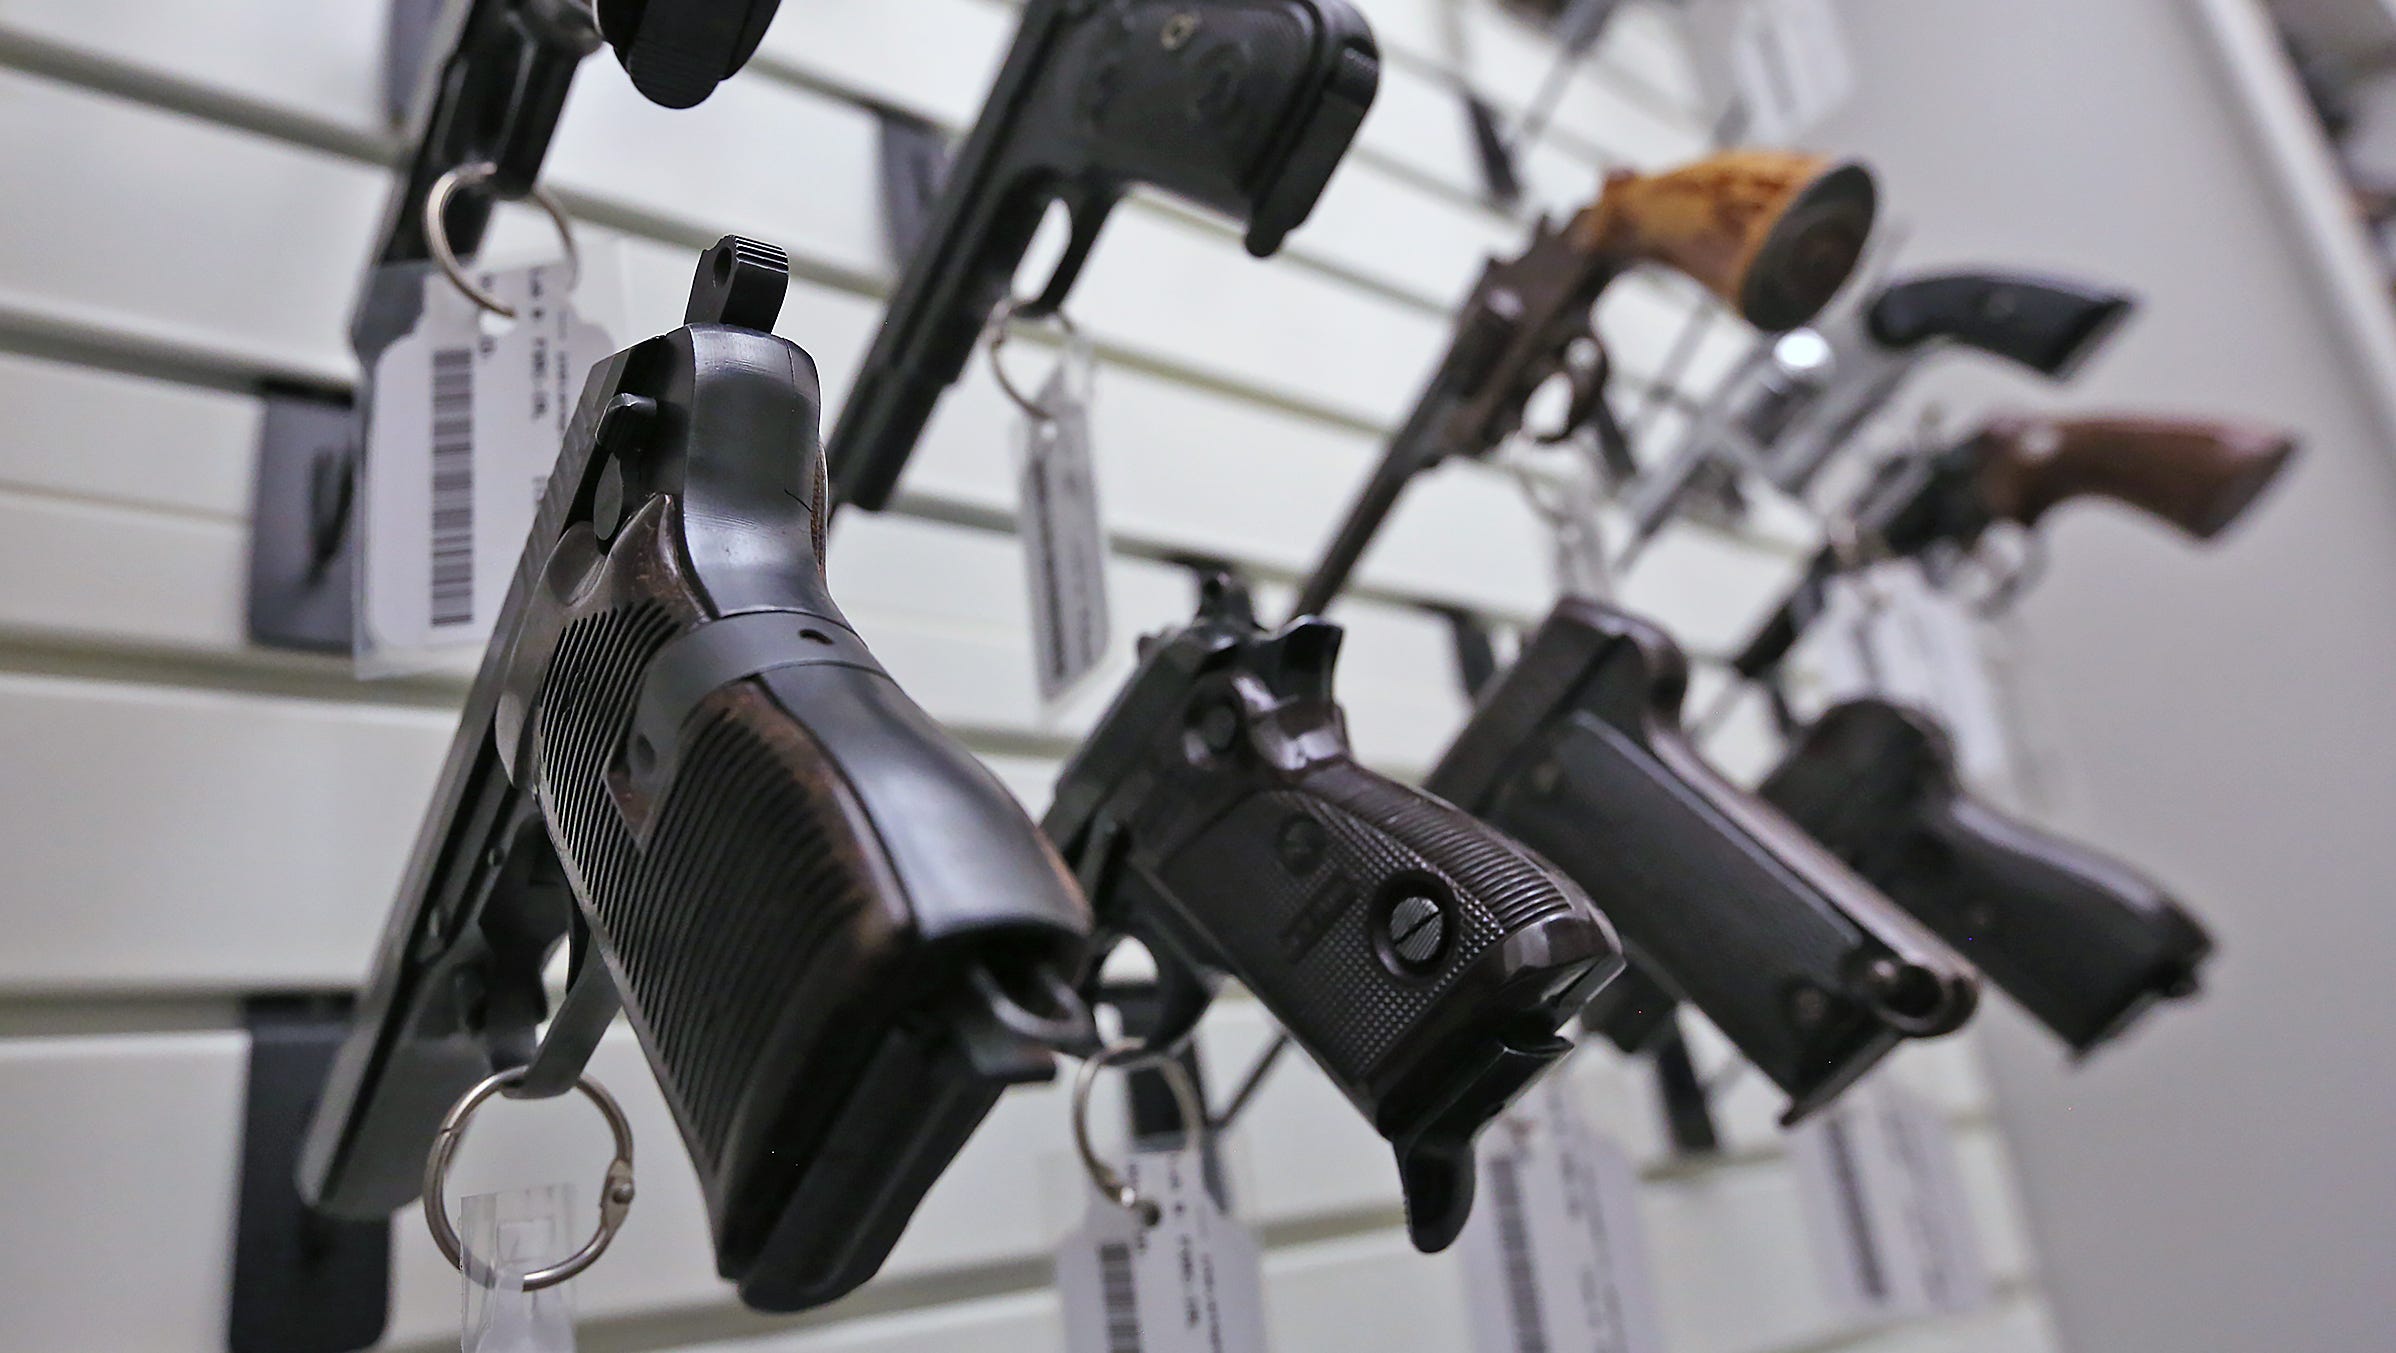 Universal Gun Background Checks What It Would Mean For Indiana